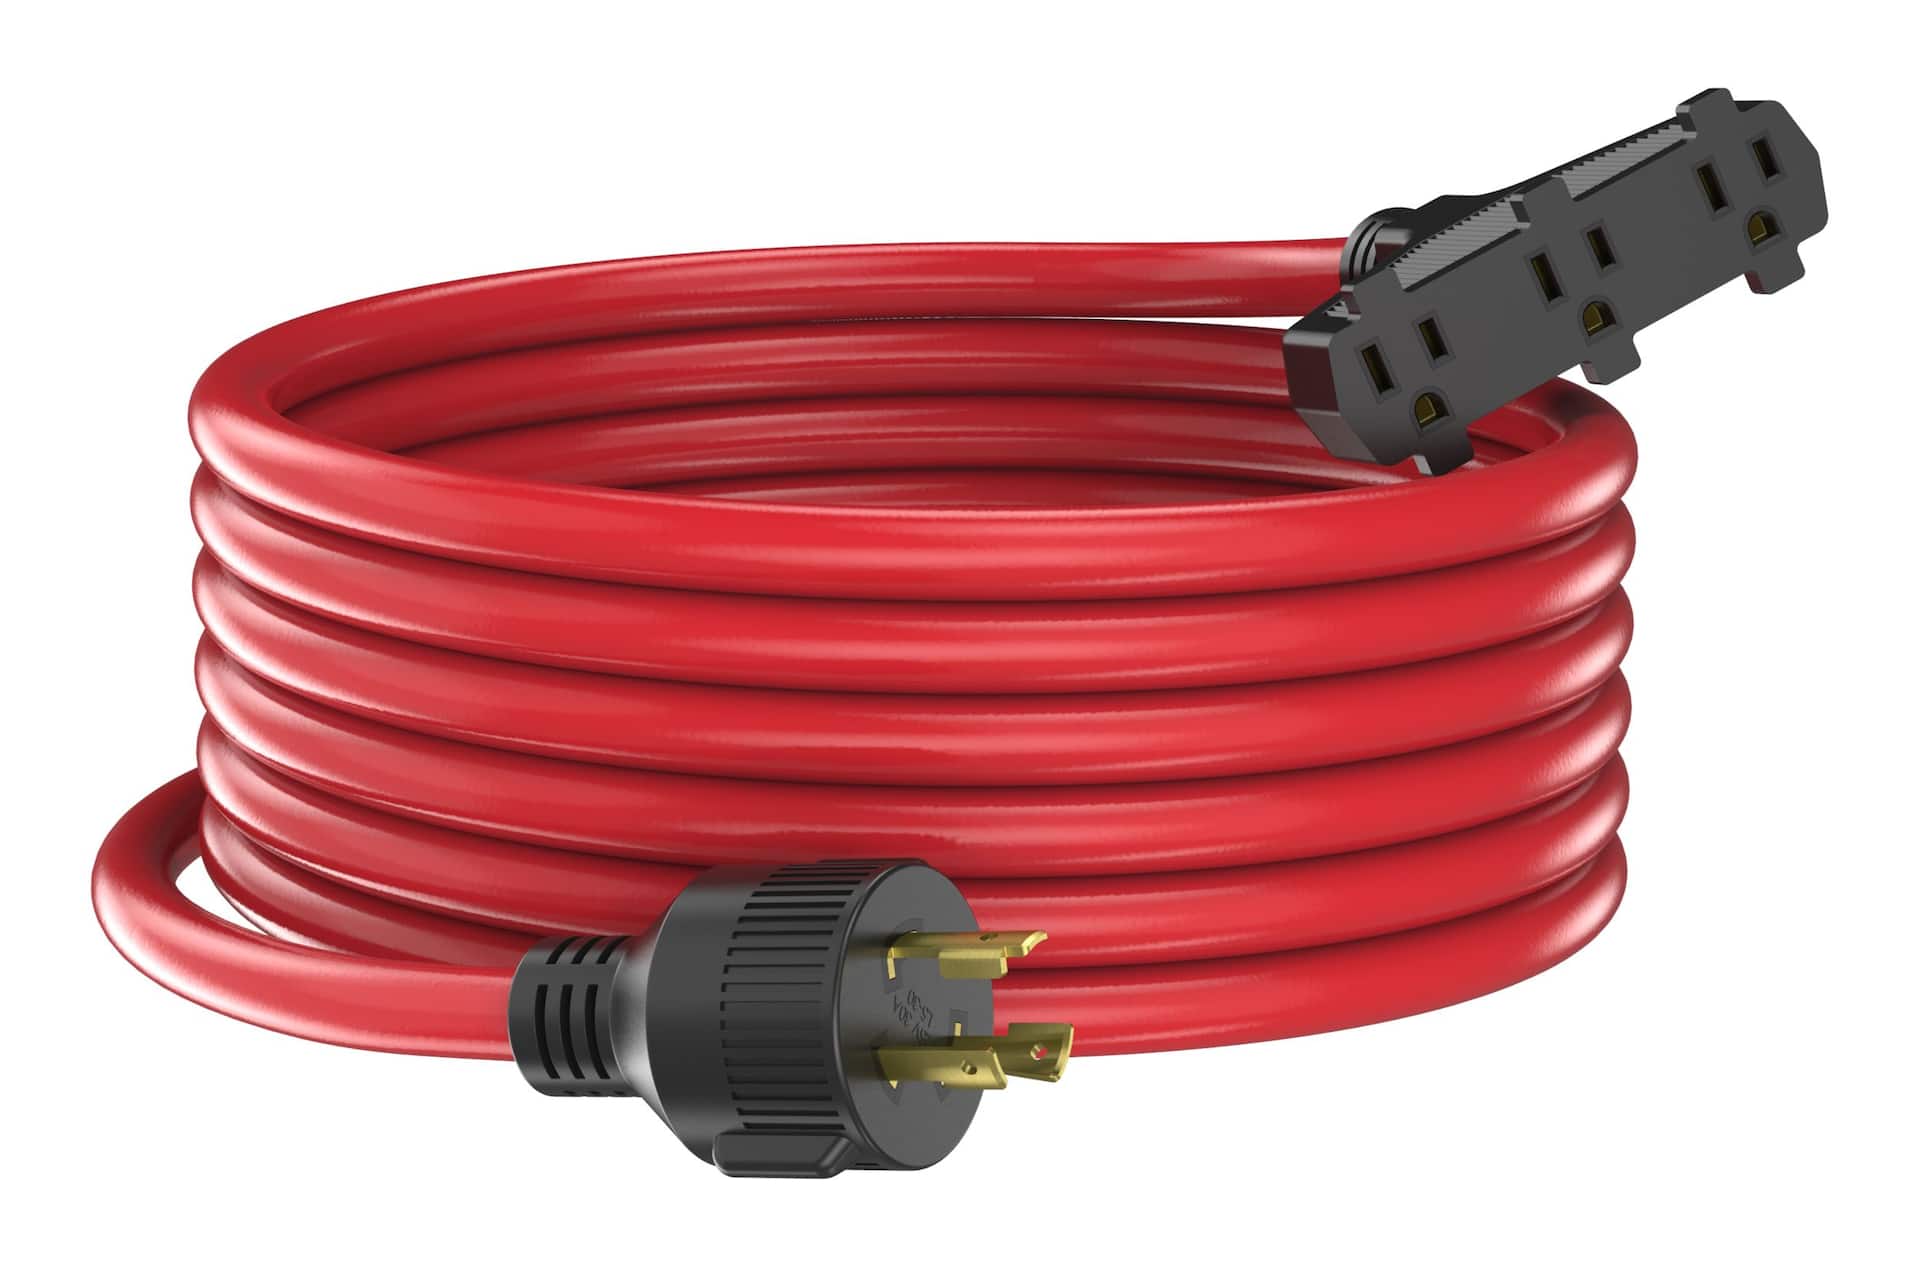 Energizer 30A 25-ft Triple-Outlet Extension Cord, Red